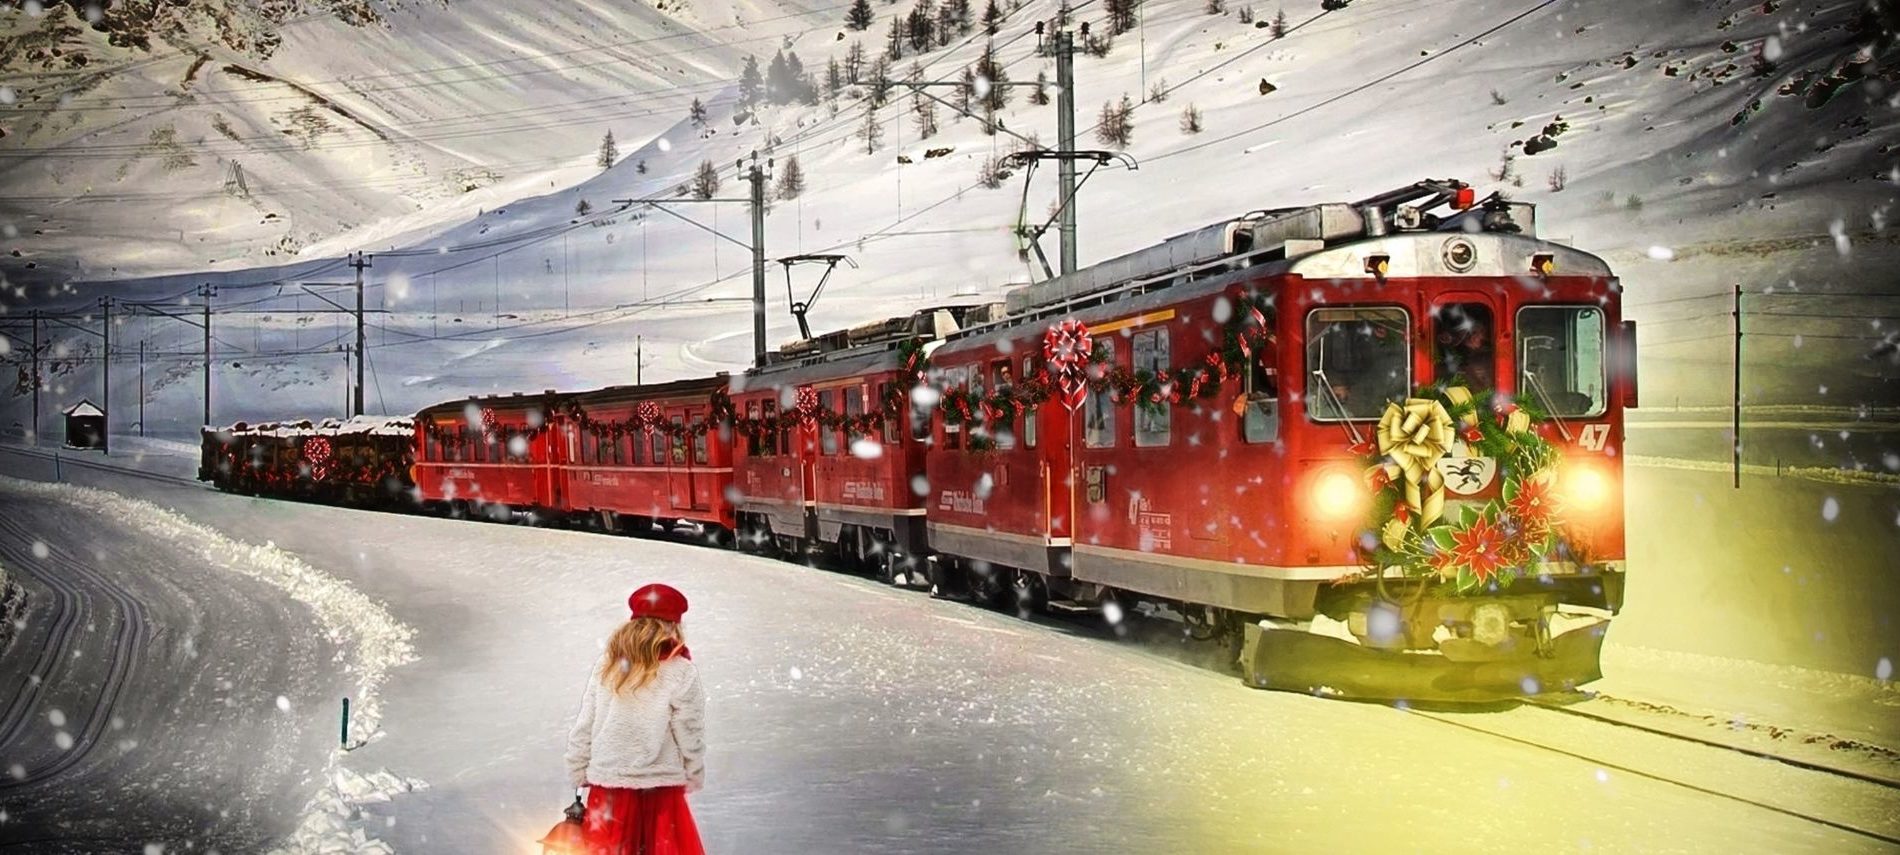 Red vintage train with Christmas decorations in front, with snow coming down. Small girl with red beret and red dress over snow parka waiting for train.